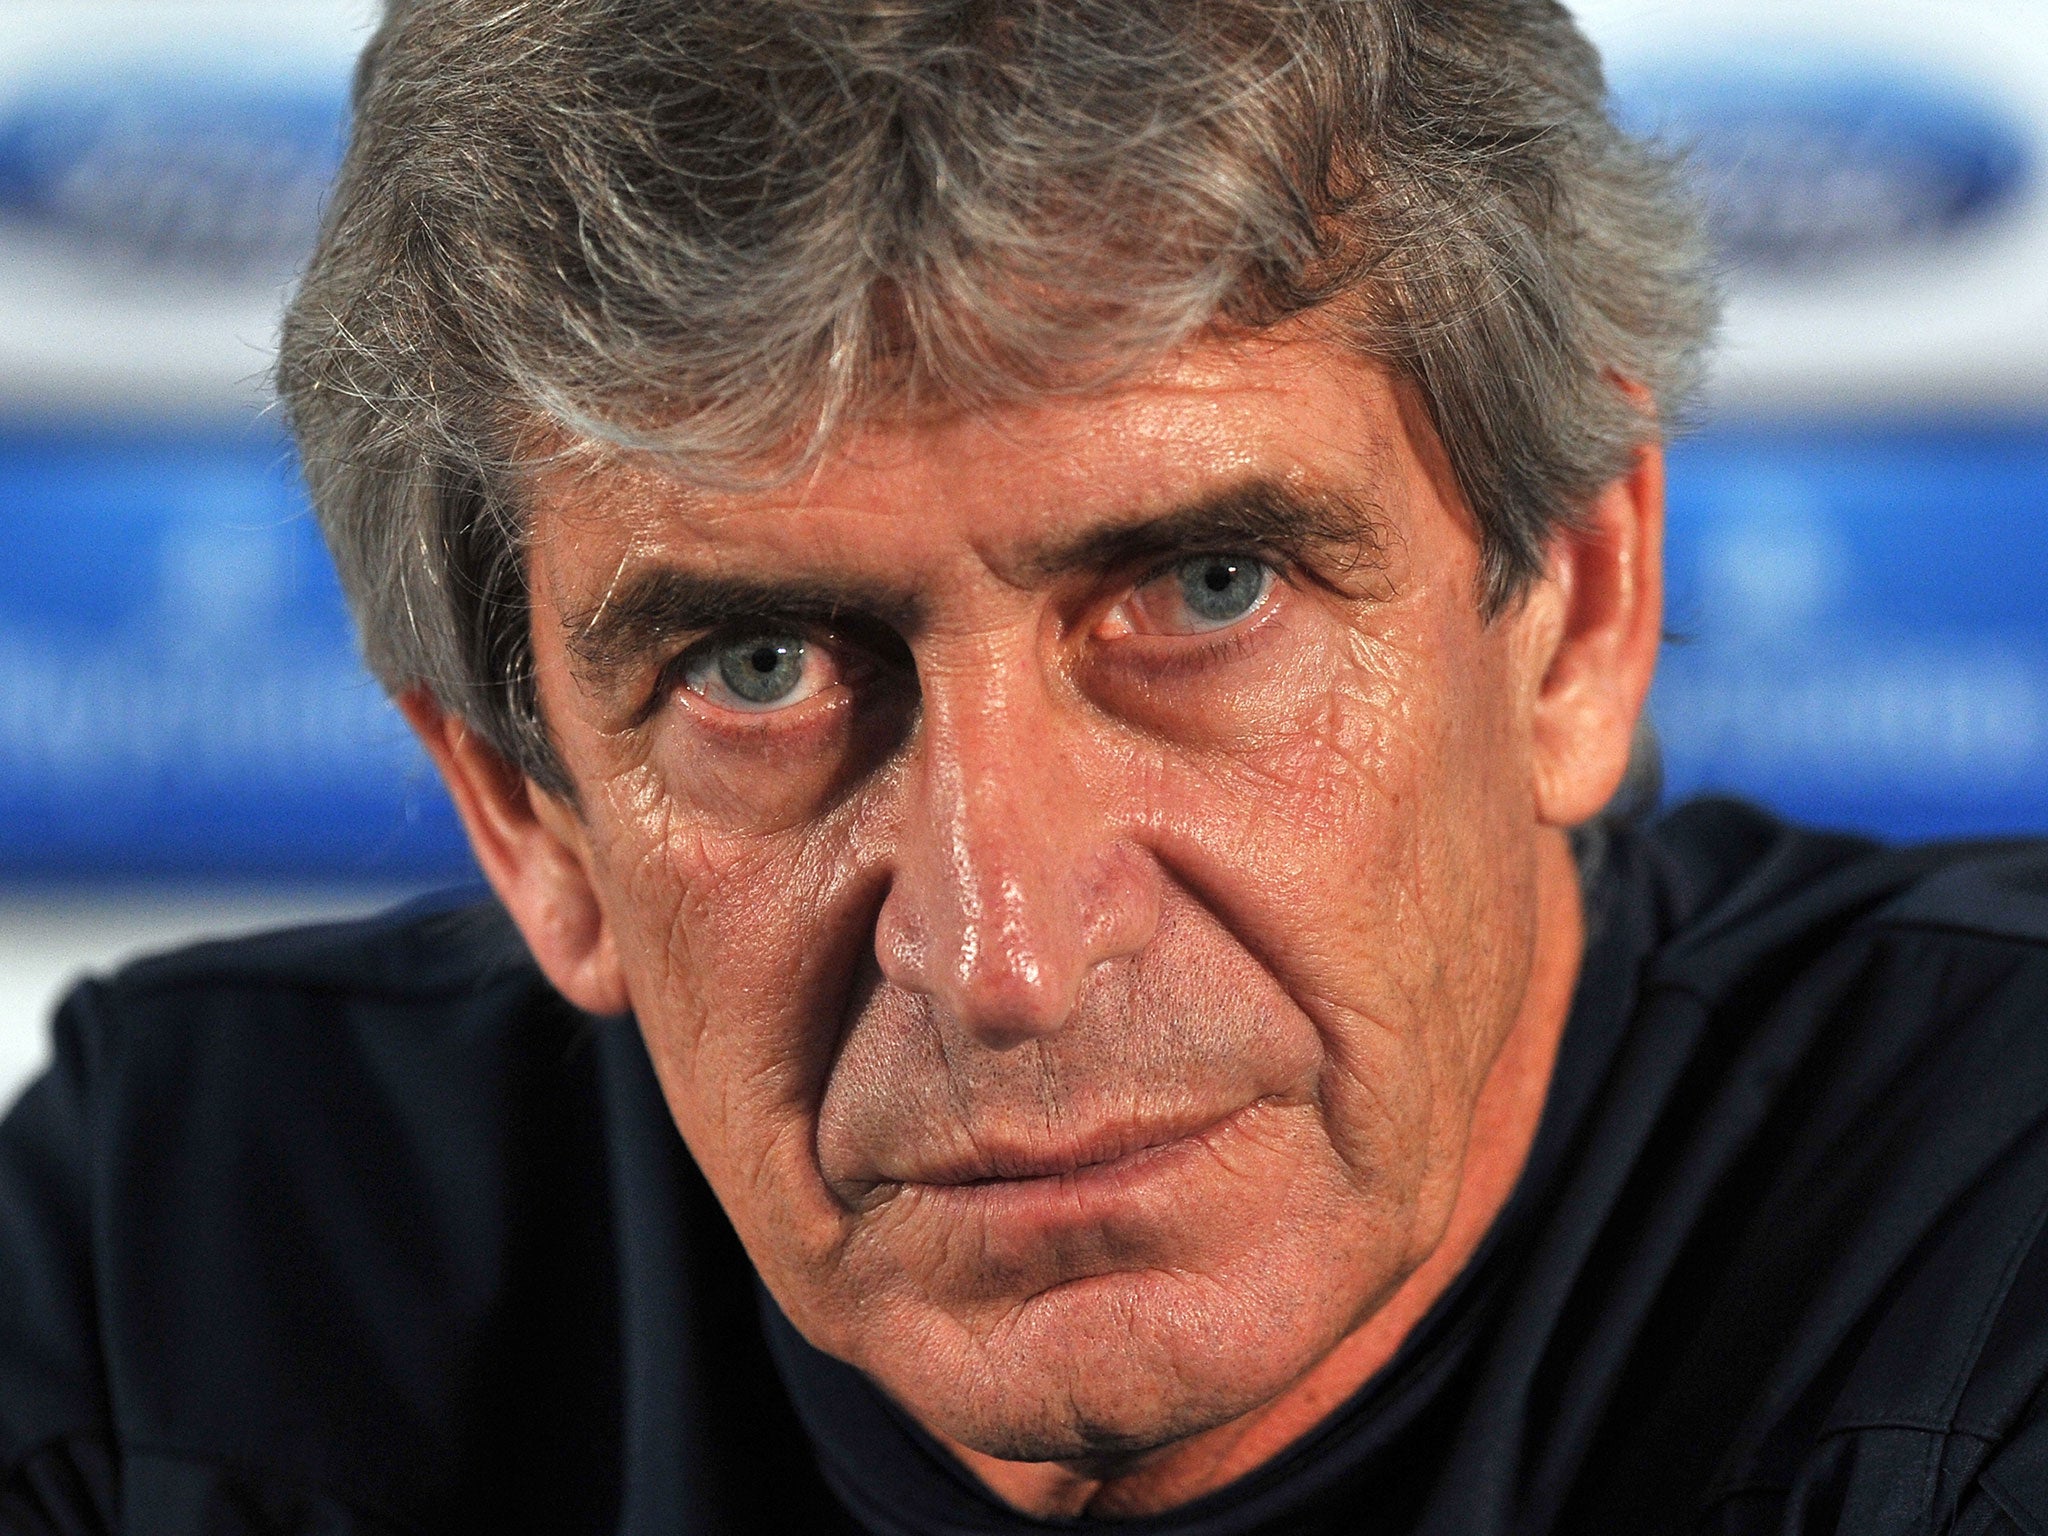 Manchester City manager Manuel Pellegrini believes his side are on the verge of a Champions League breakthrough